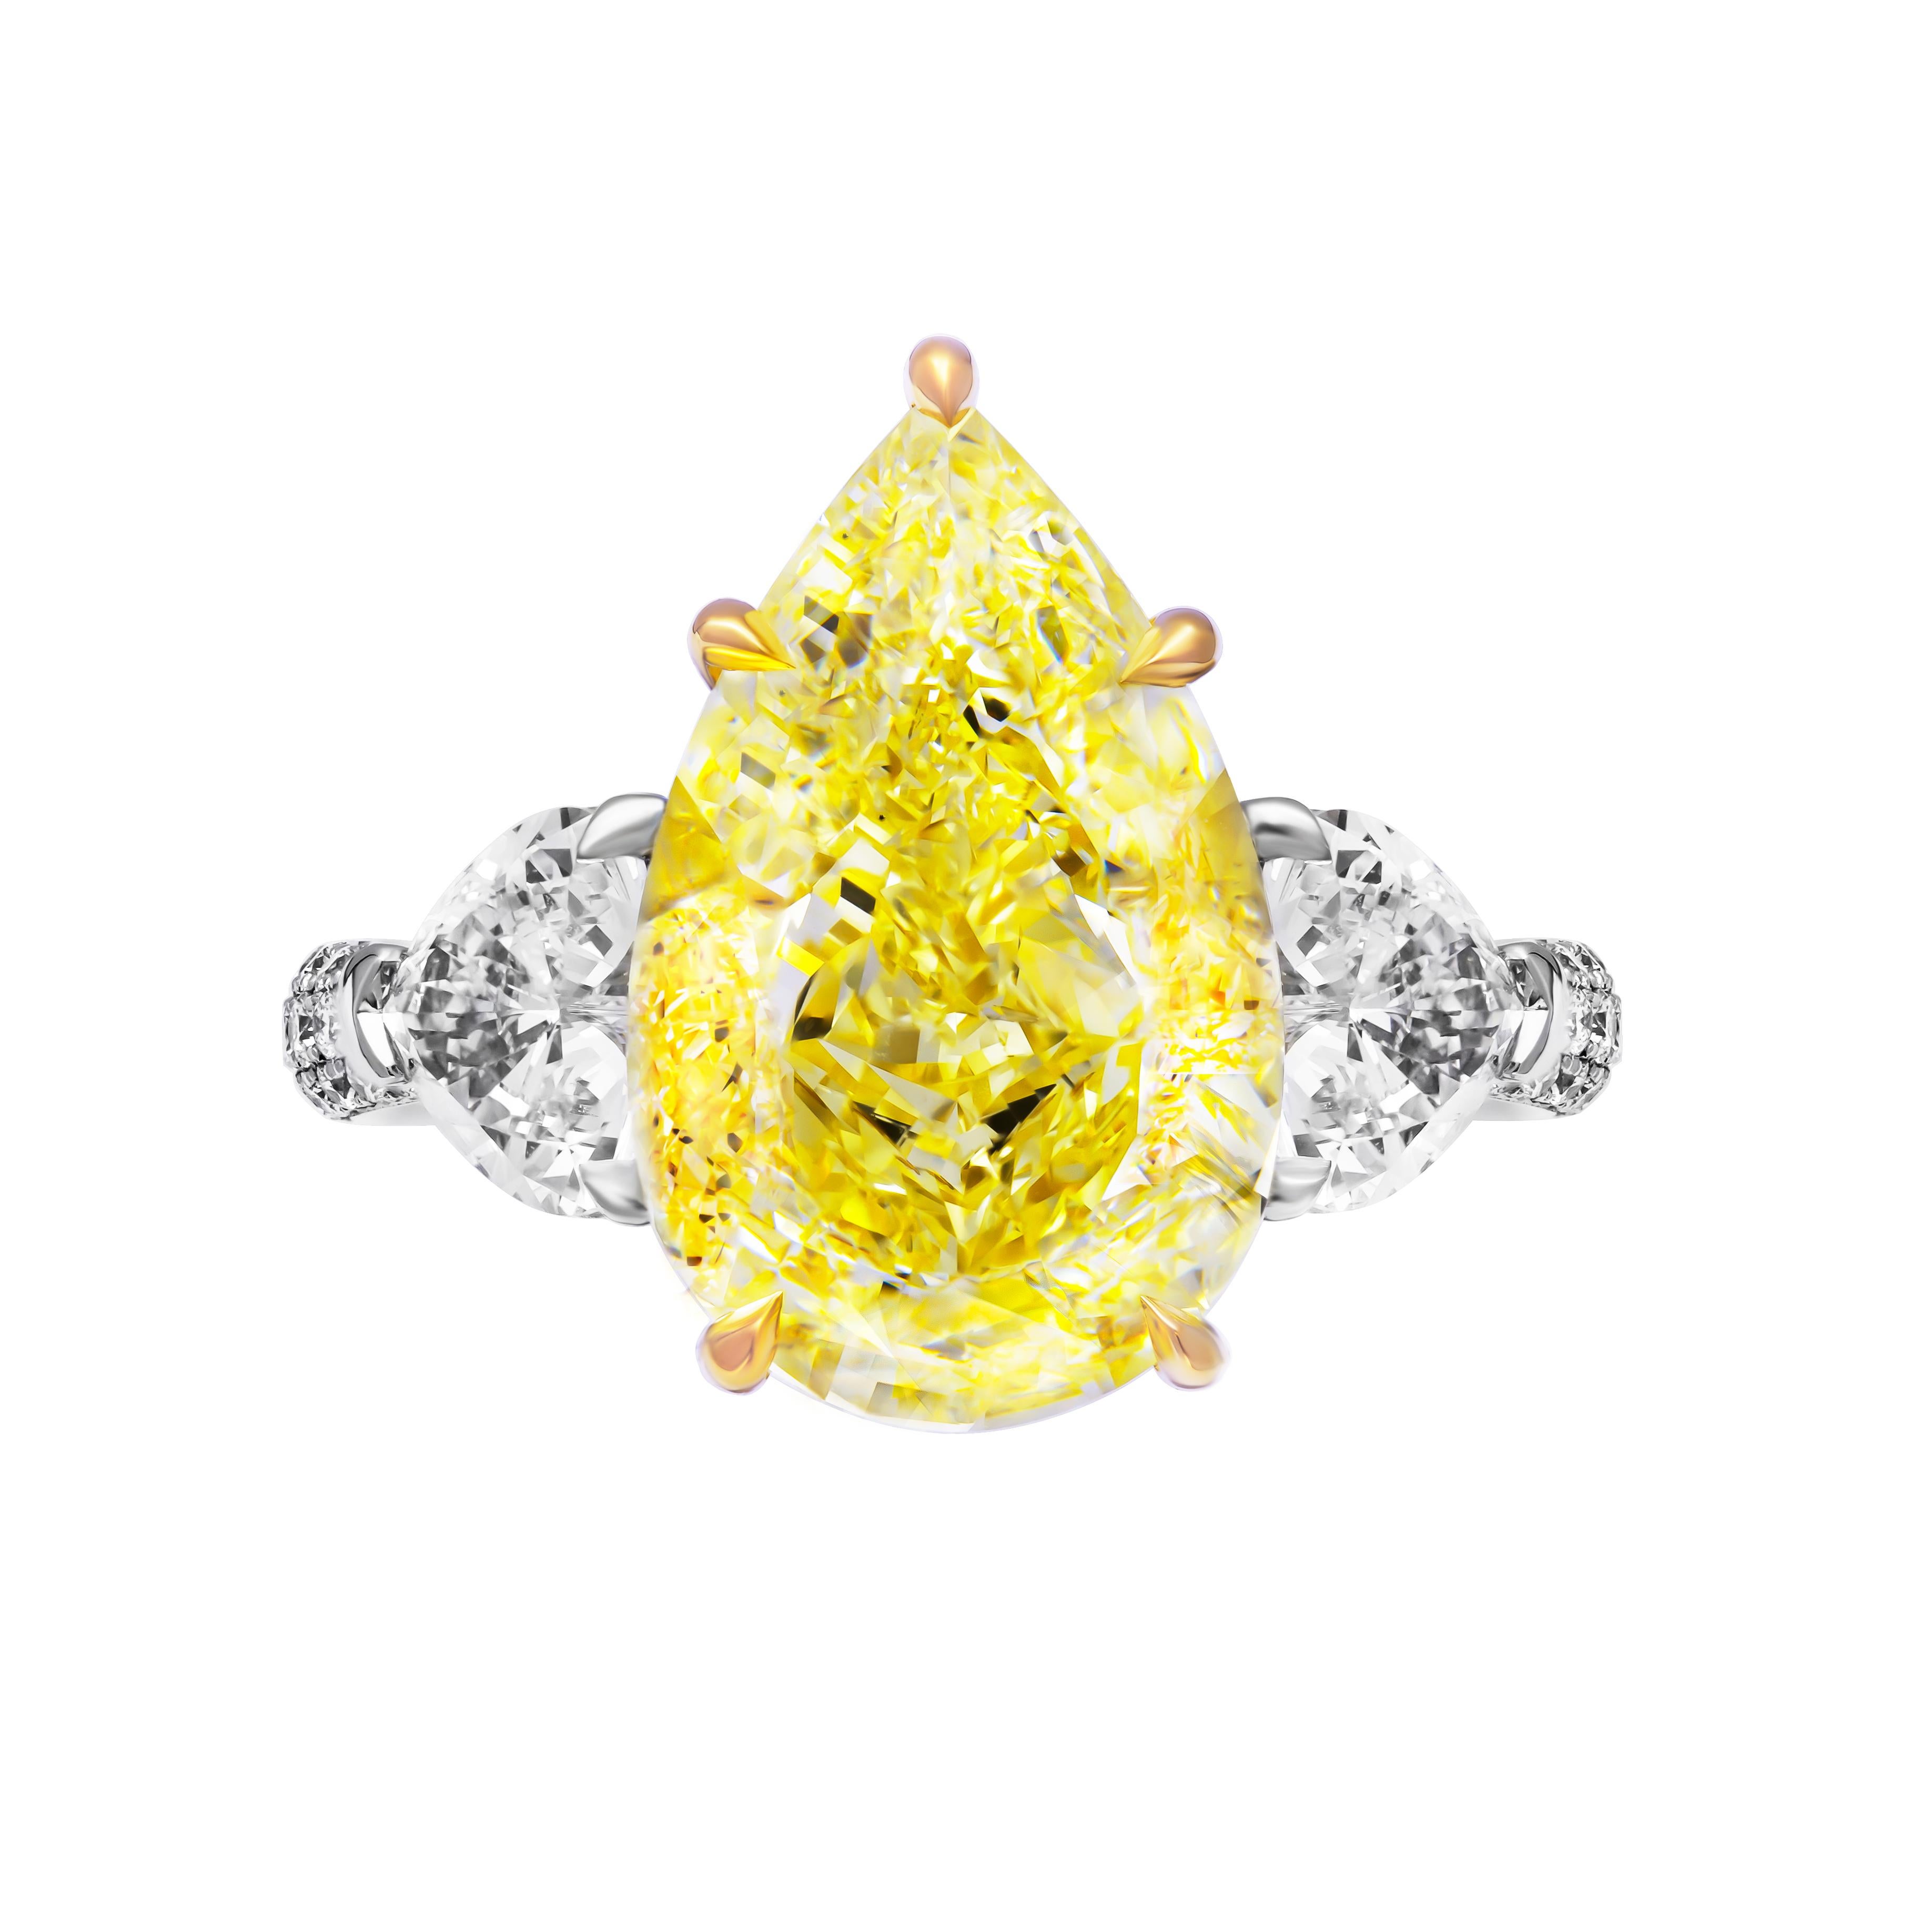 Immerse yourself in the splendor of luxury with this extraordinary three-stone ring, meticulously crafted in a harmonious blend of 18K yellow gold and 950 platinum. At its focal point reigns a magnificent 7.78-carat fancy yellow pear-shaped diamond,